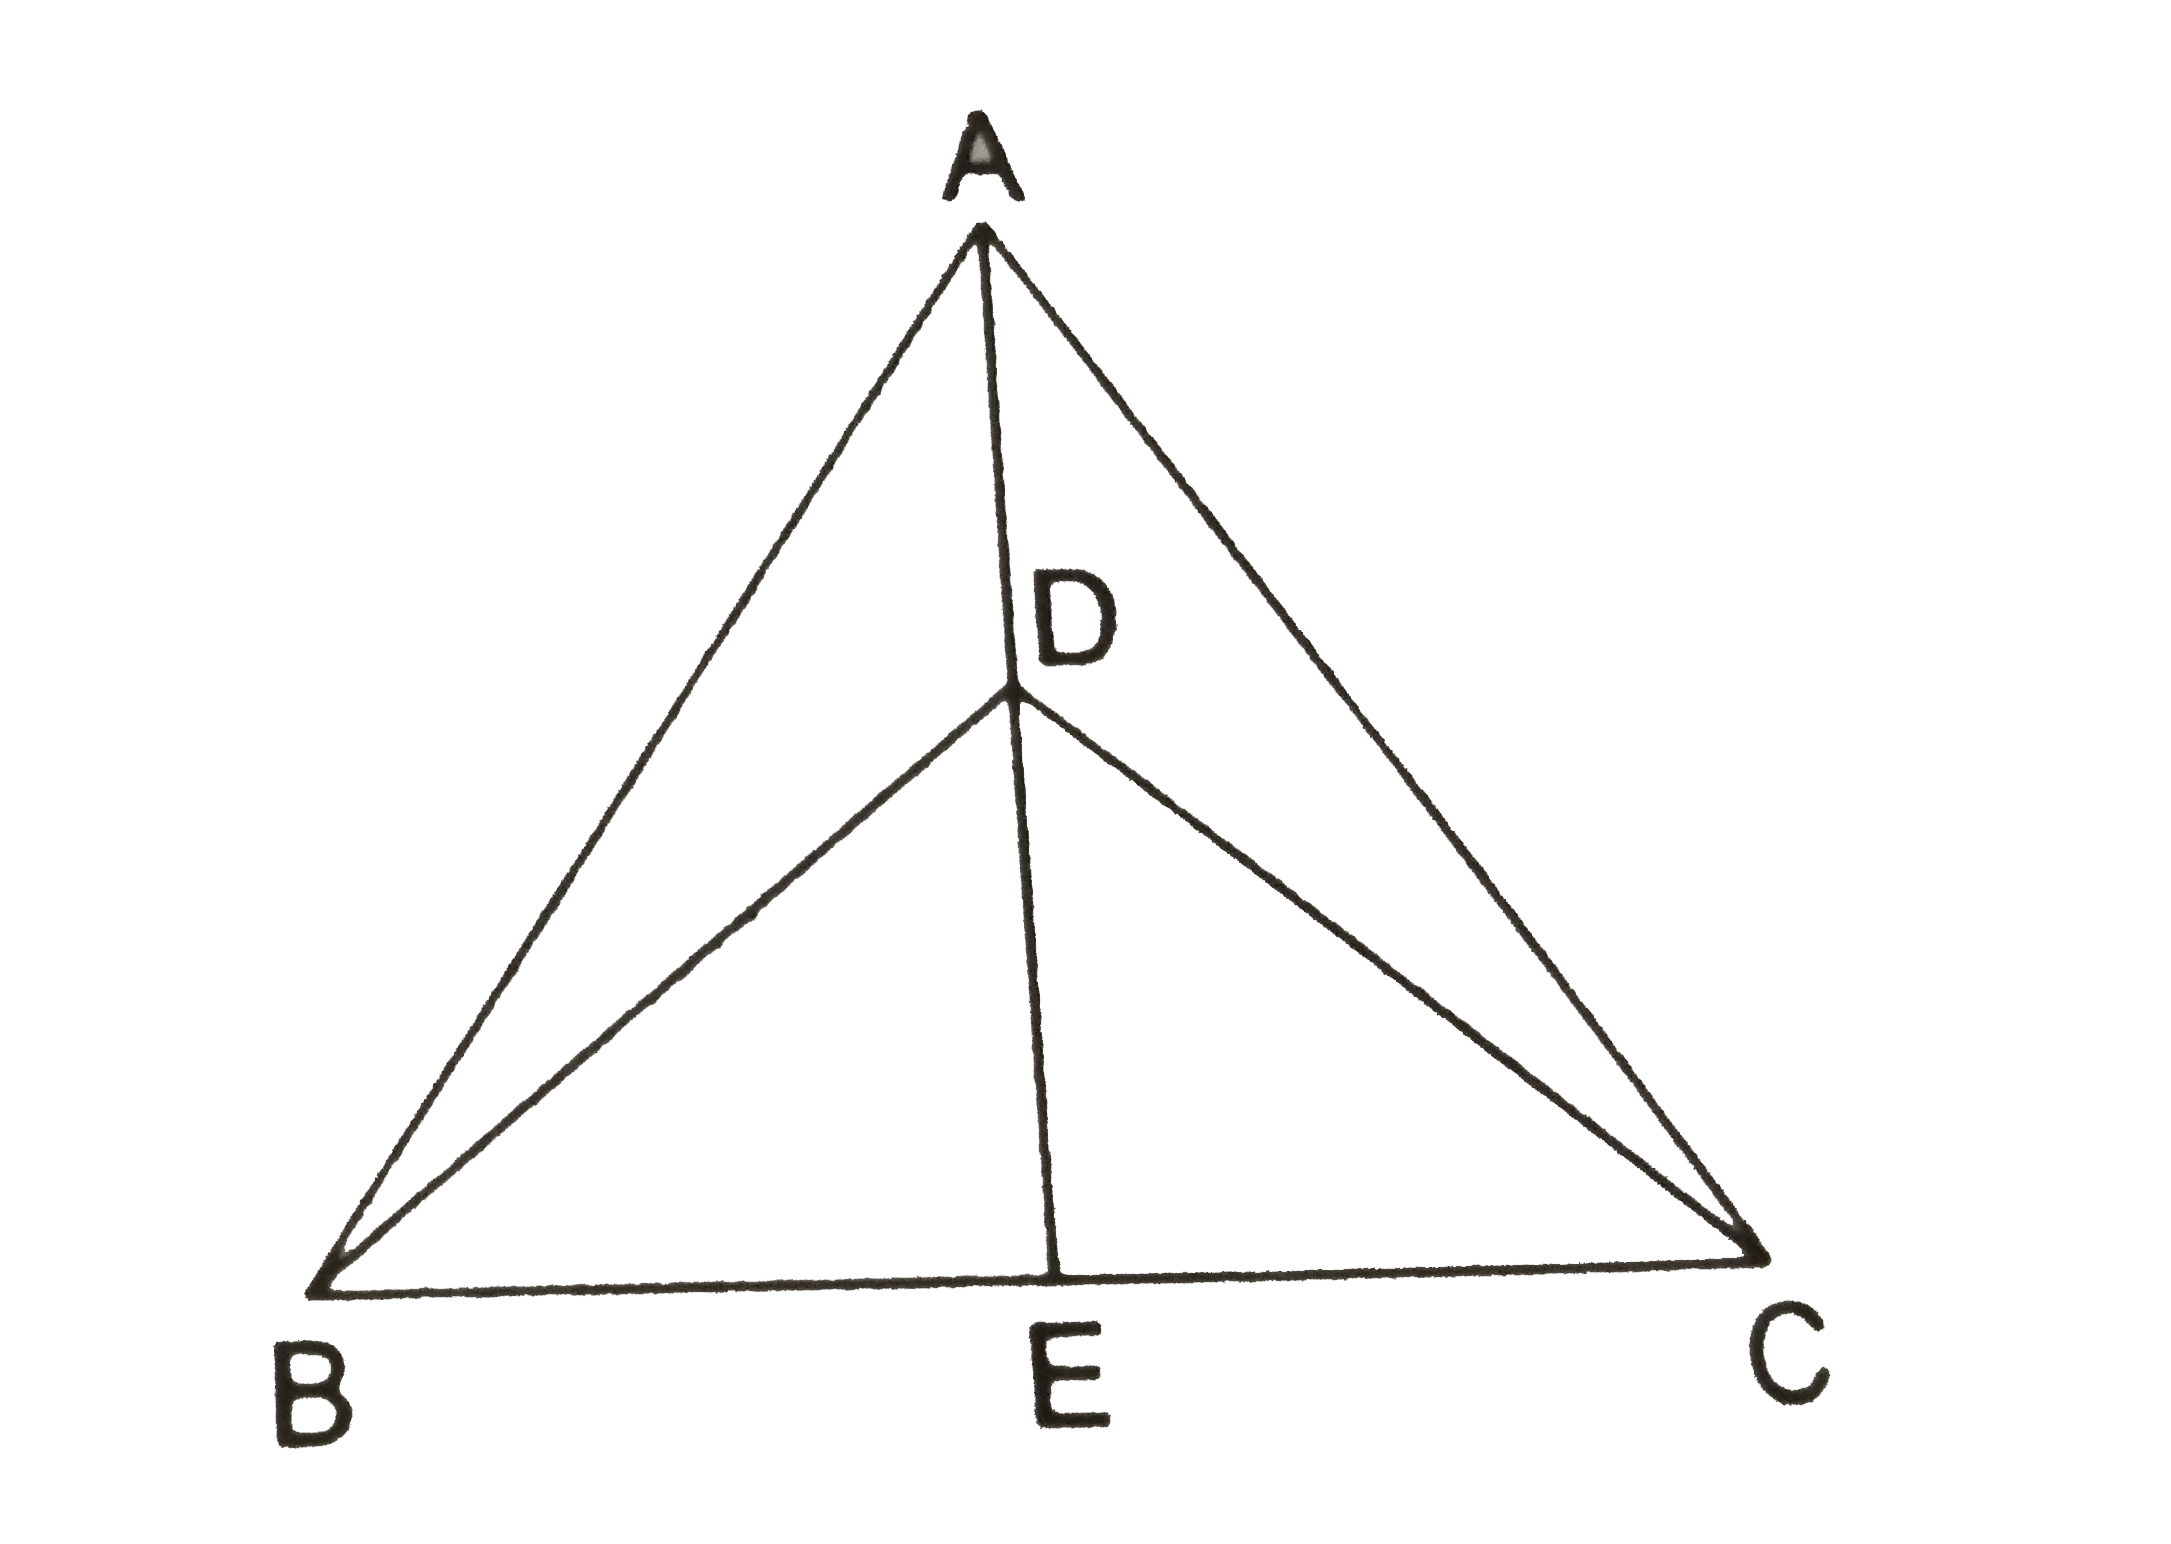 DeltaABC and DeltaDBC are two isosceles triangles on the same base BC and vertices A and D are on the same side of BC. If AD is extended to intersect BC at E, show that   (i) DeltaABD ~=DeltaACD   (ii) DeltaABE~=DeltaACE   (iii) AE bisects angleA as well as angleD   (iv) AE is the perpendicualr bisector of BC.